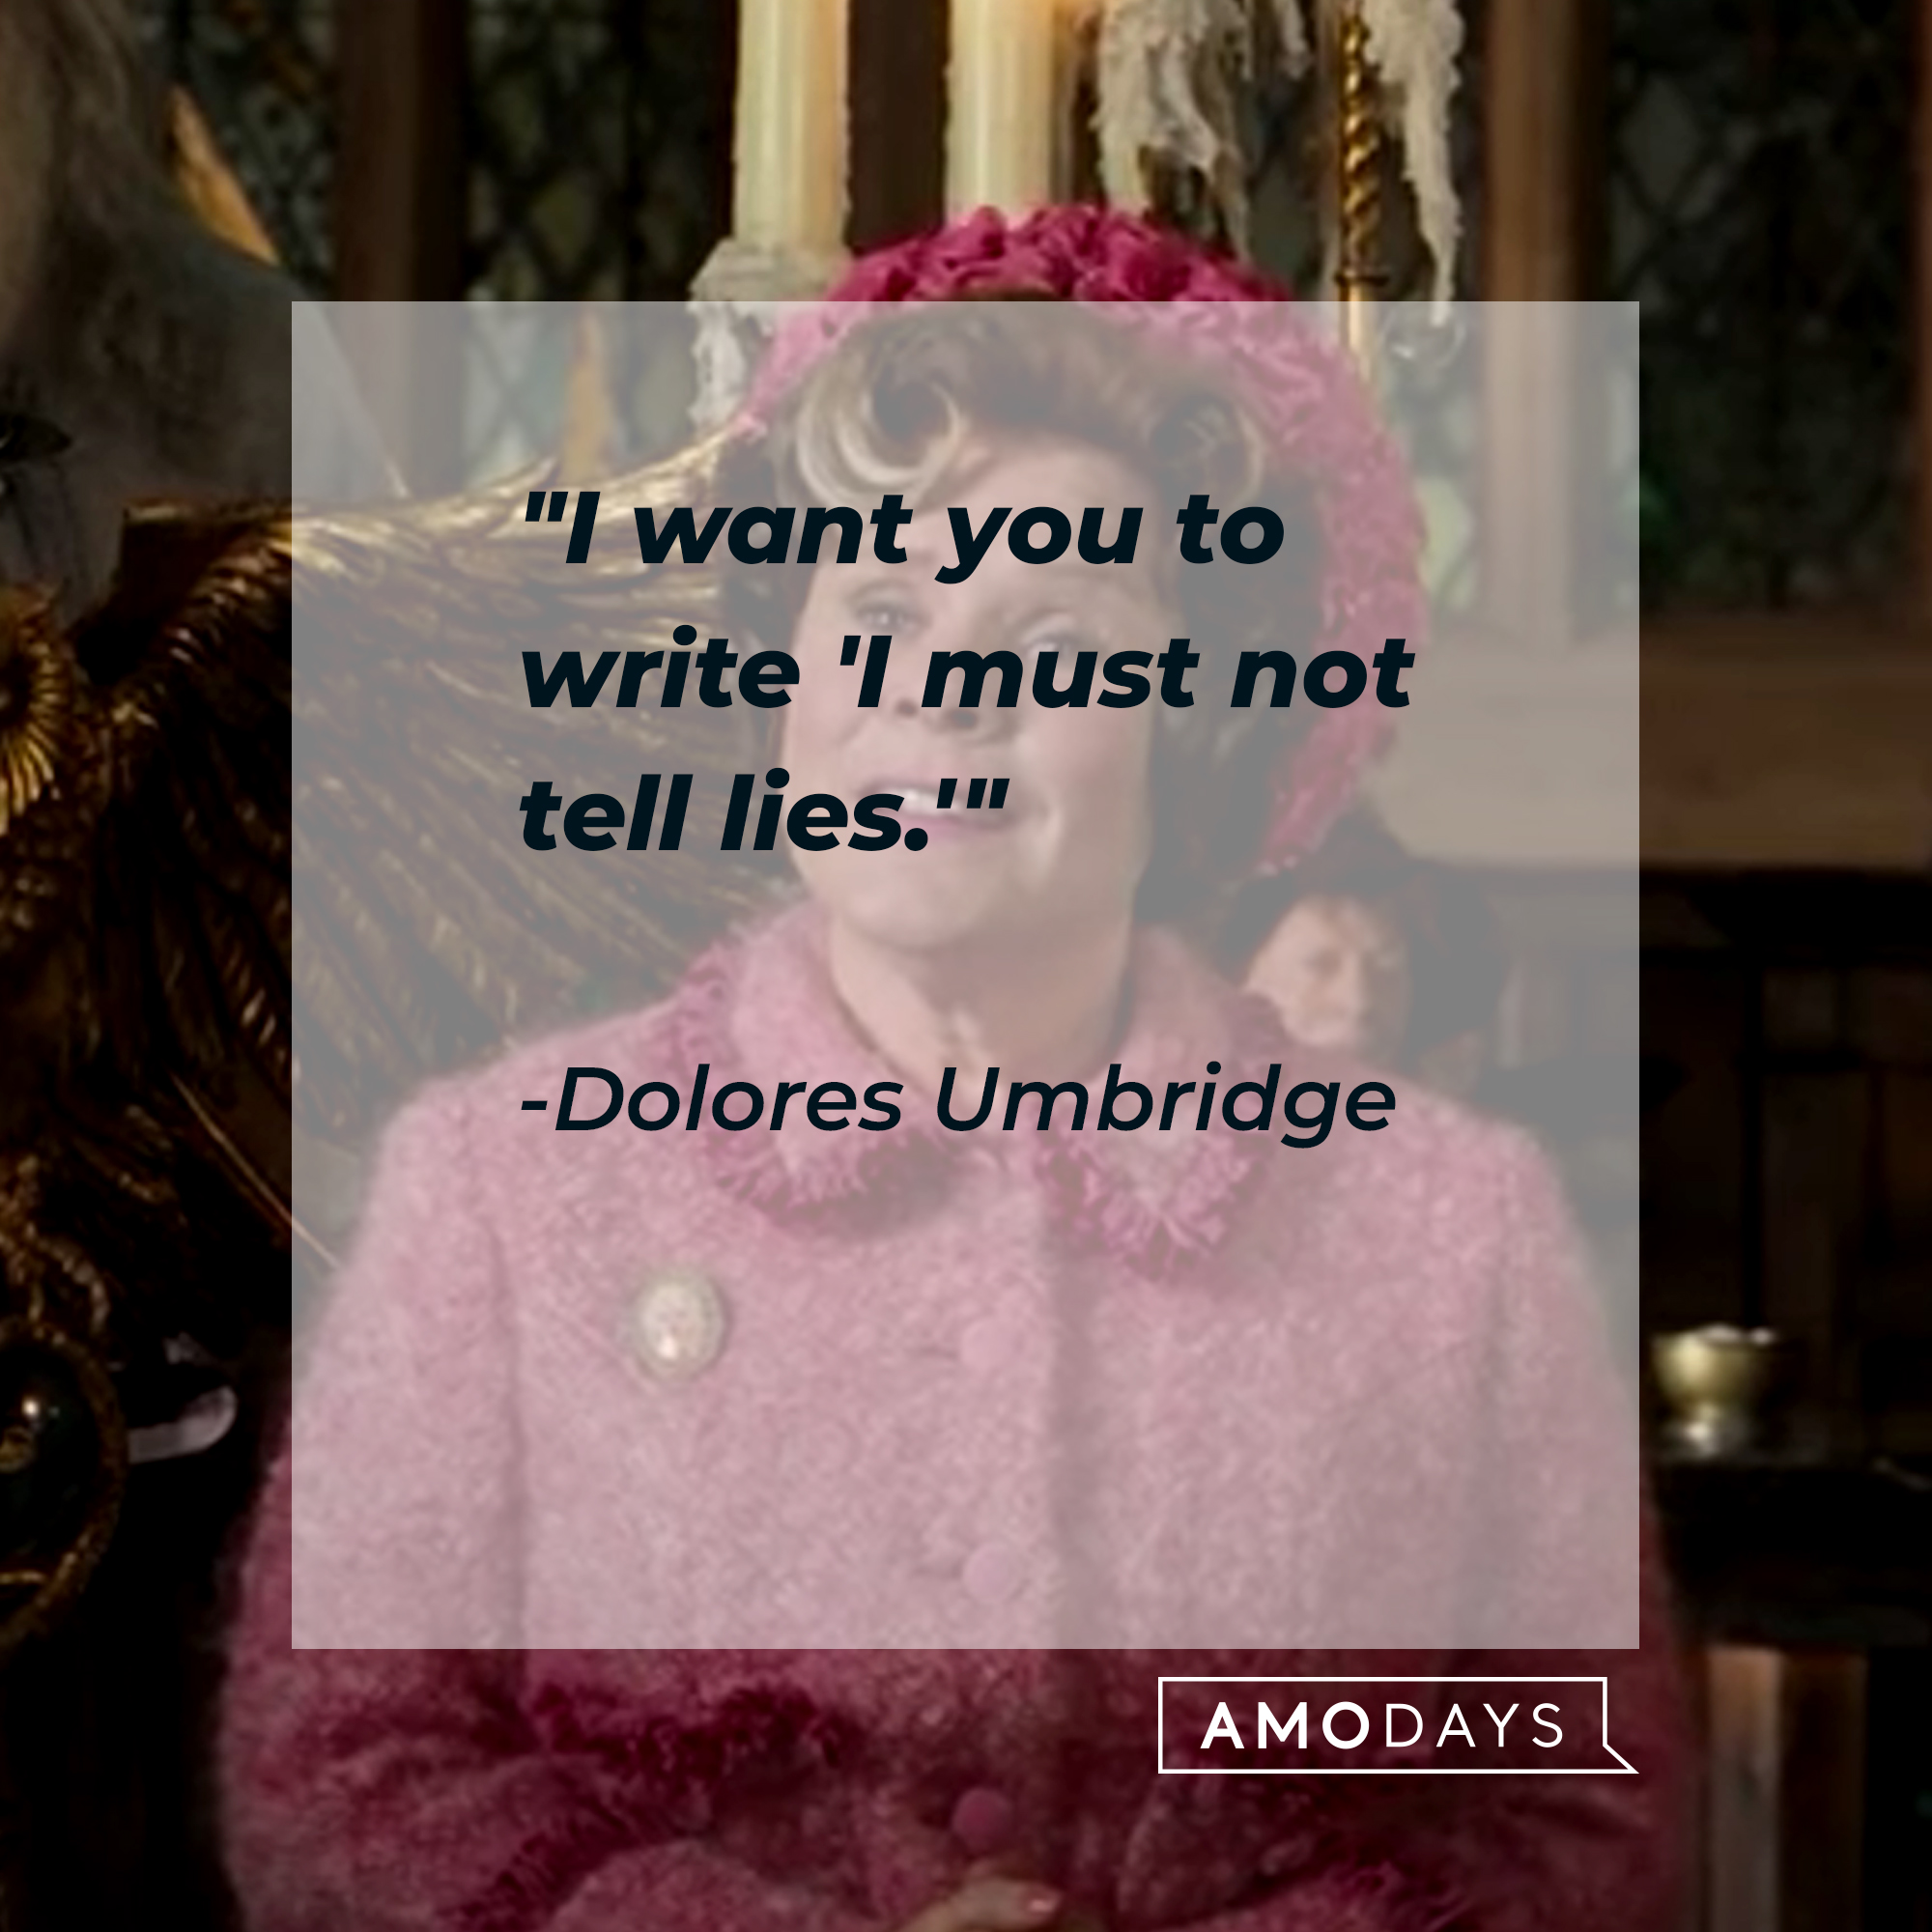 A photo of Dolores Umbridge with the quote, "I want you to write 'I must not tell lies.'" | Source: Facebook/harrypotter